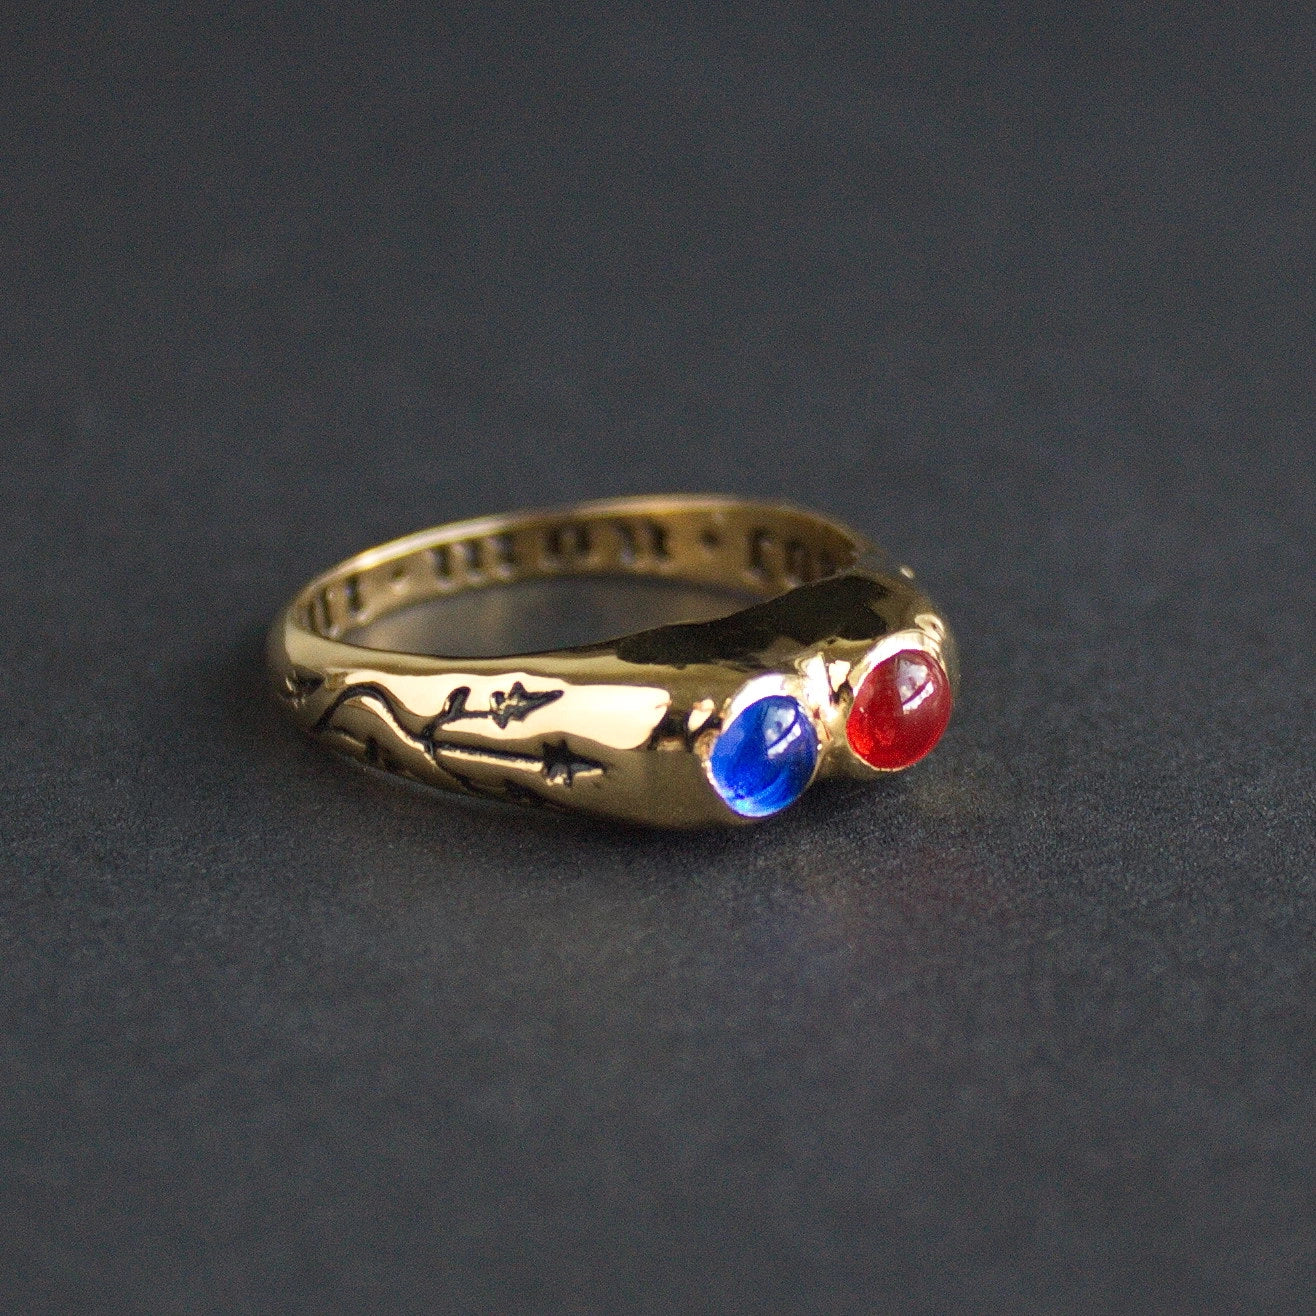 14th century English or French Posy Ring